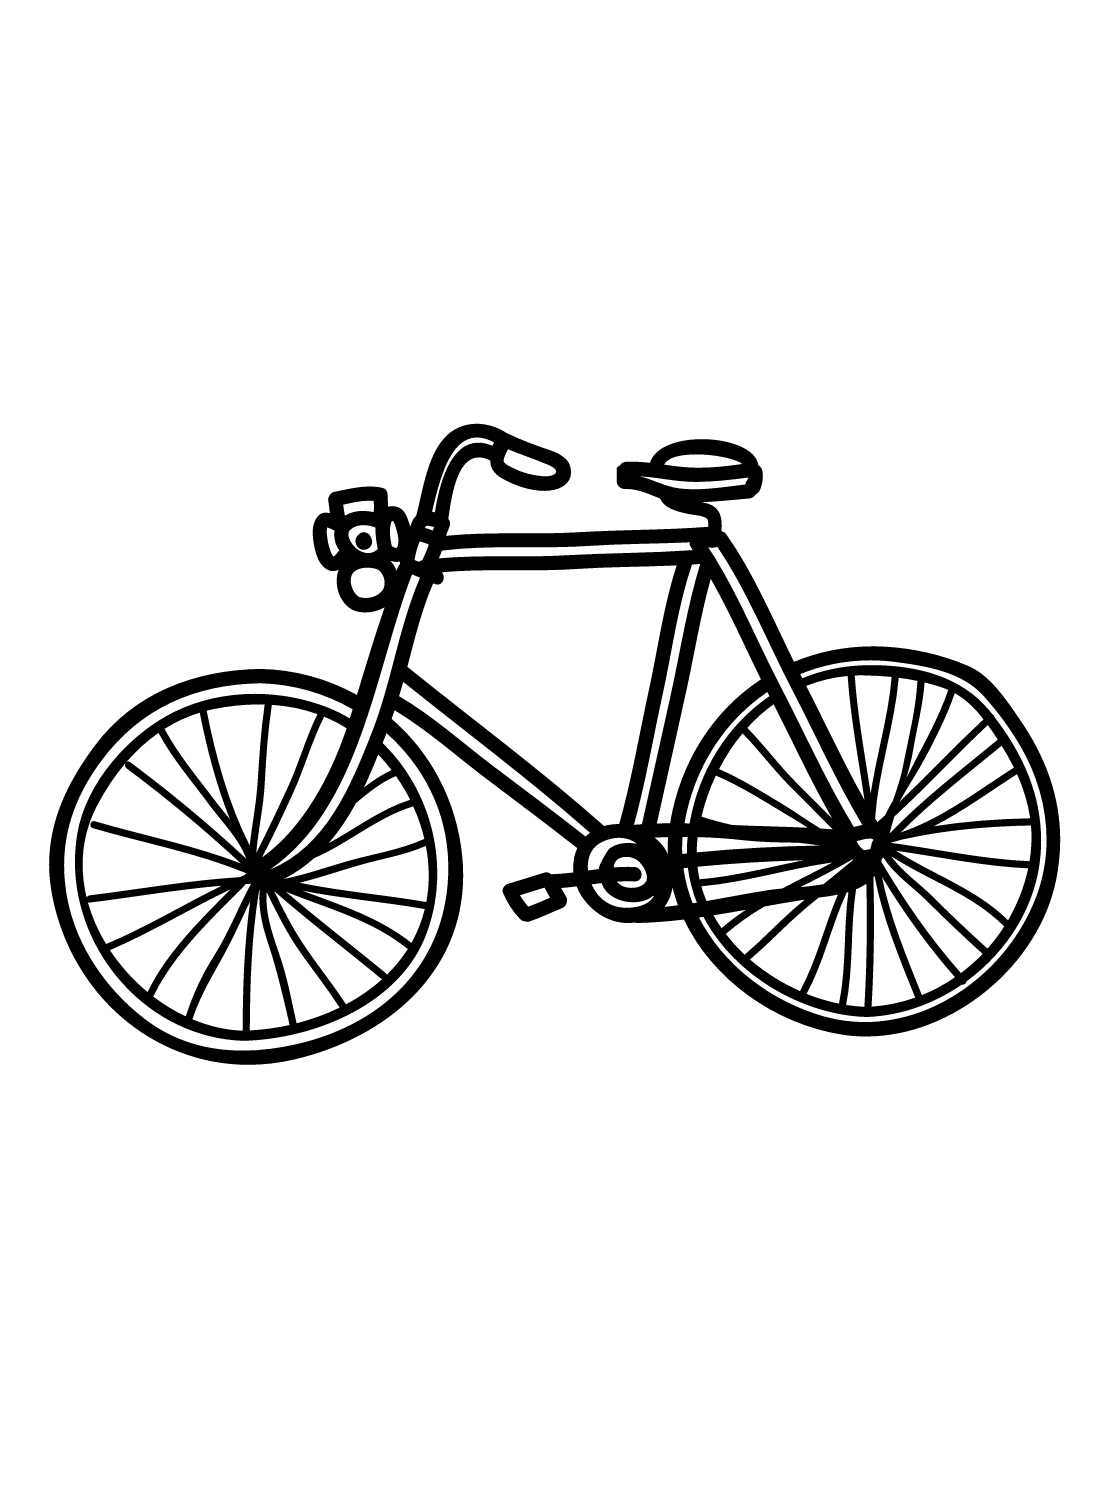 Bicycle Free Coloring Page